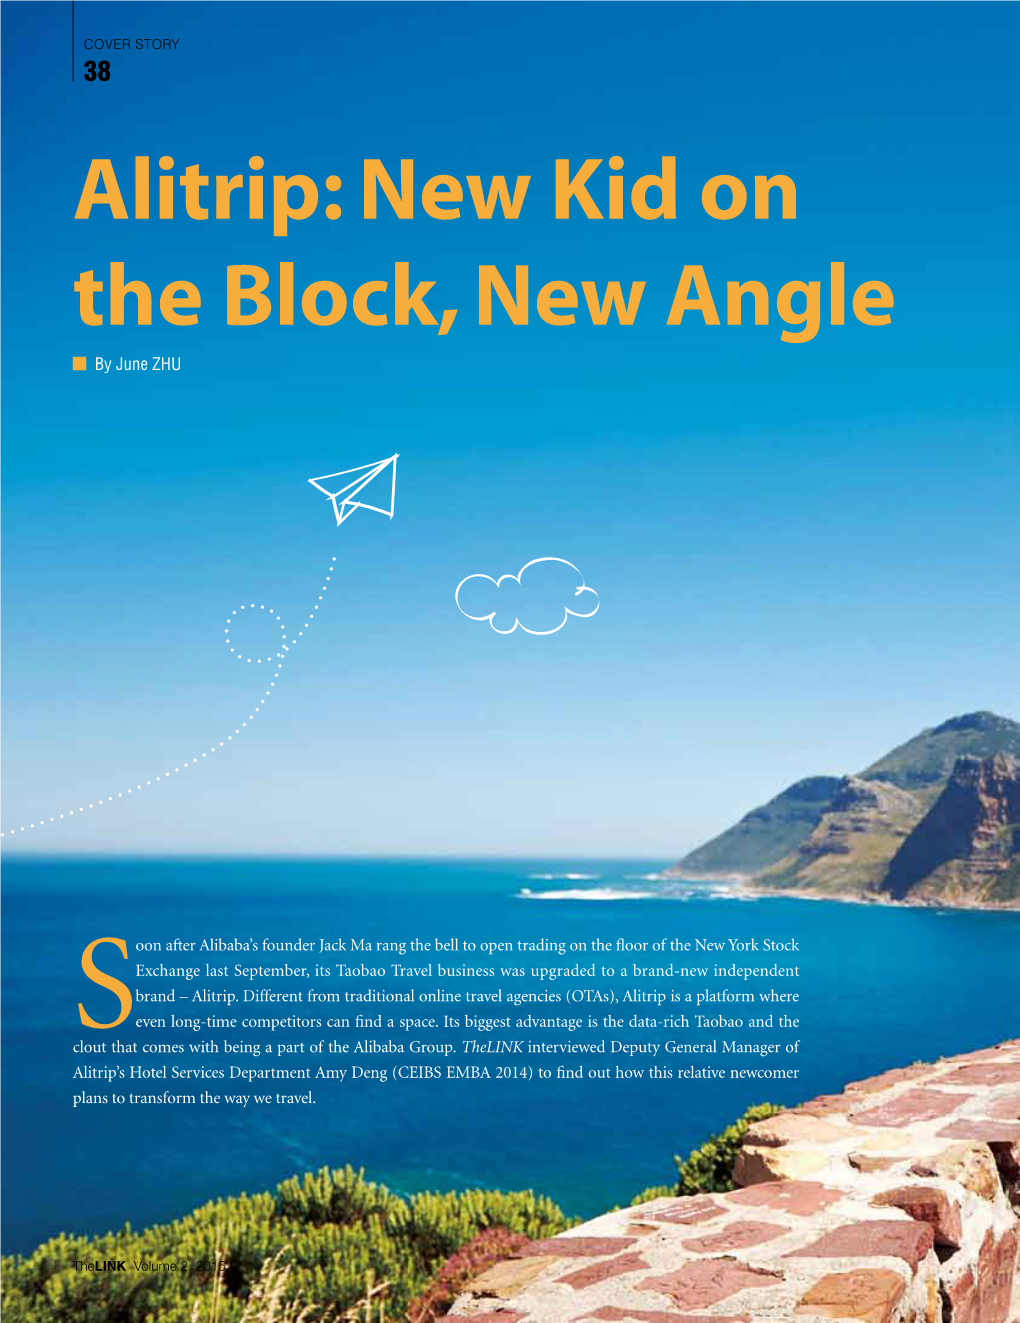 Alitrip: New Kid on the Block, New Angle by June ZHU